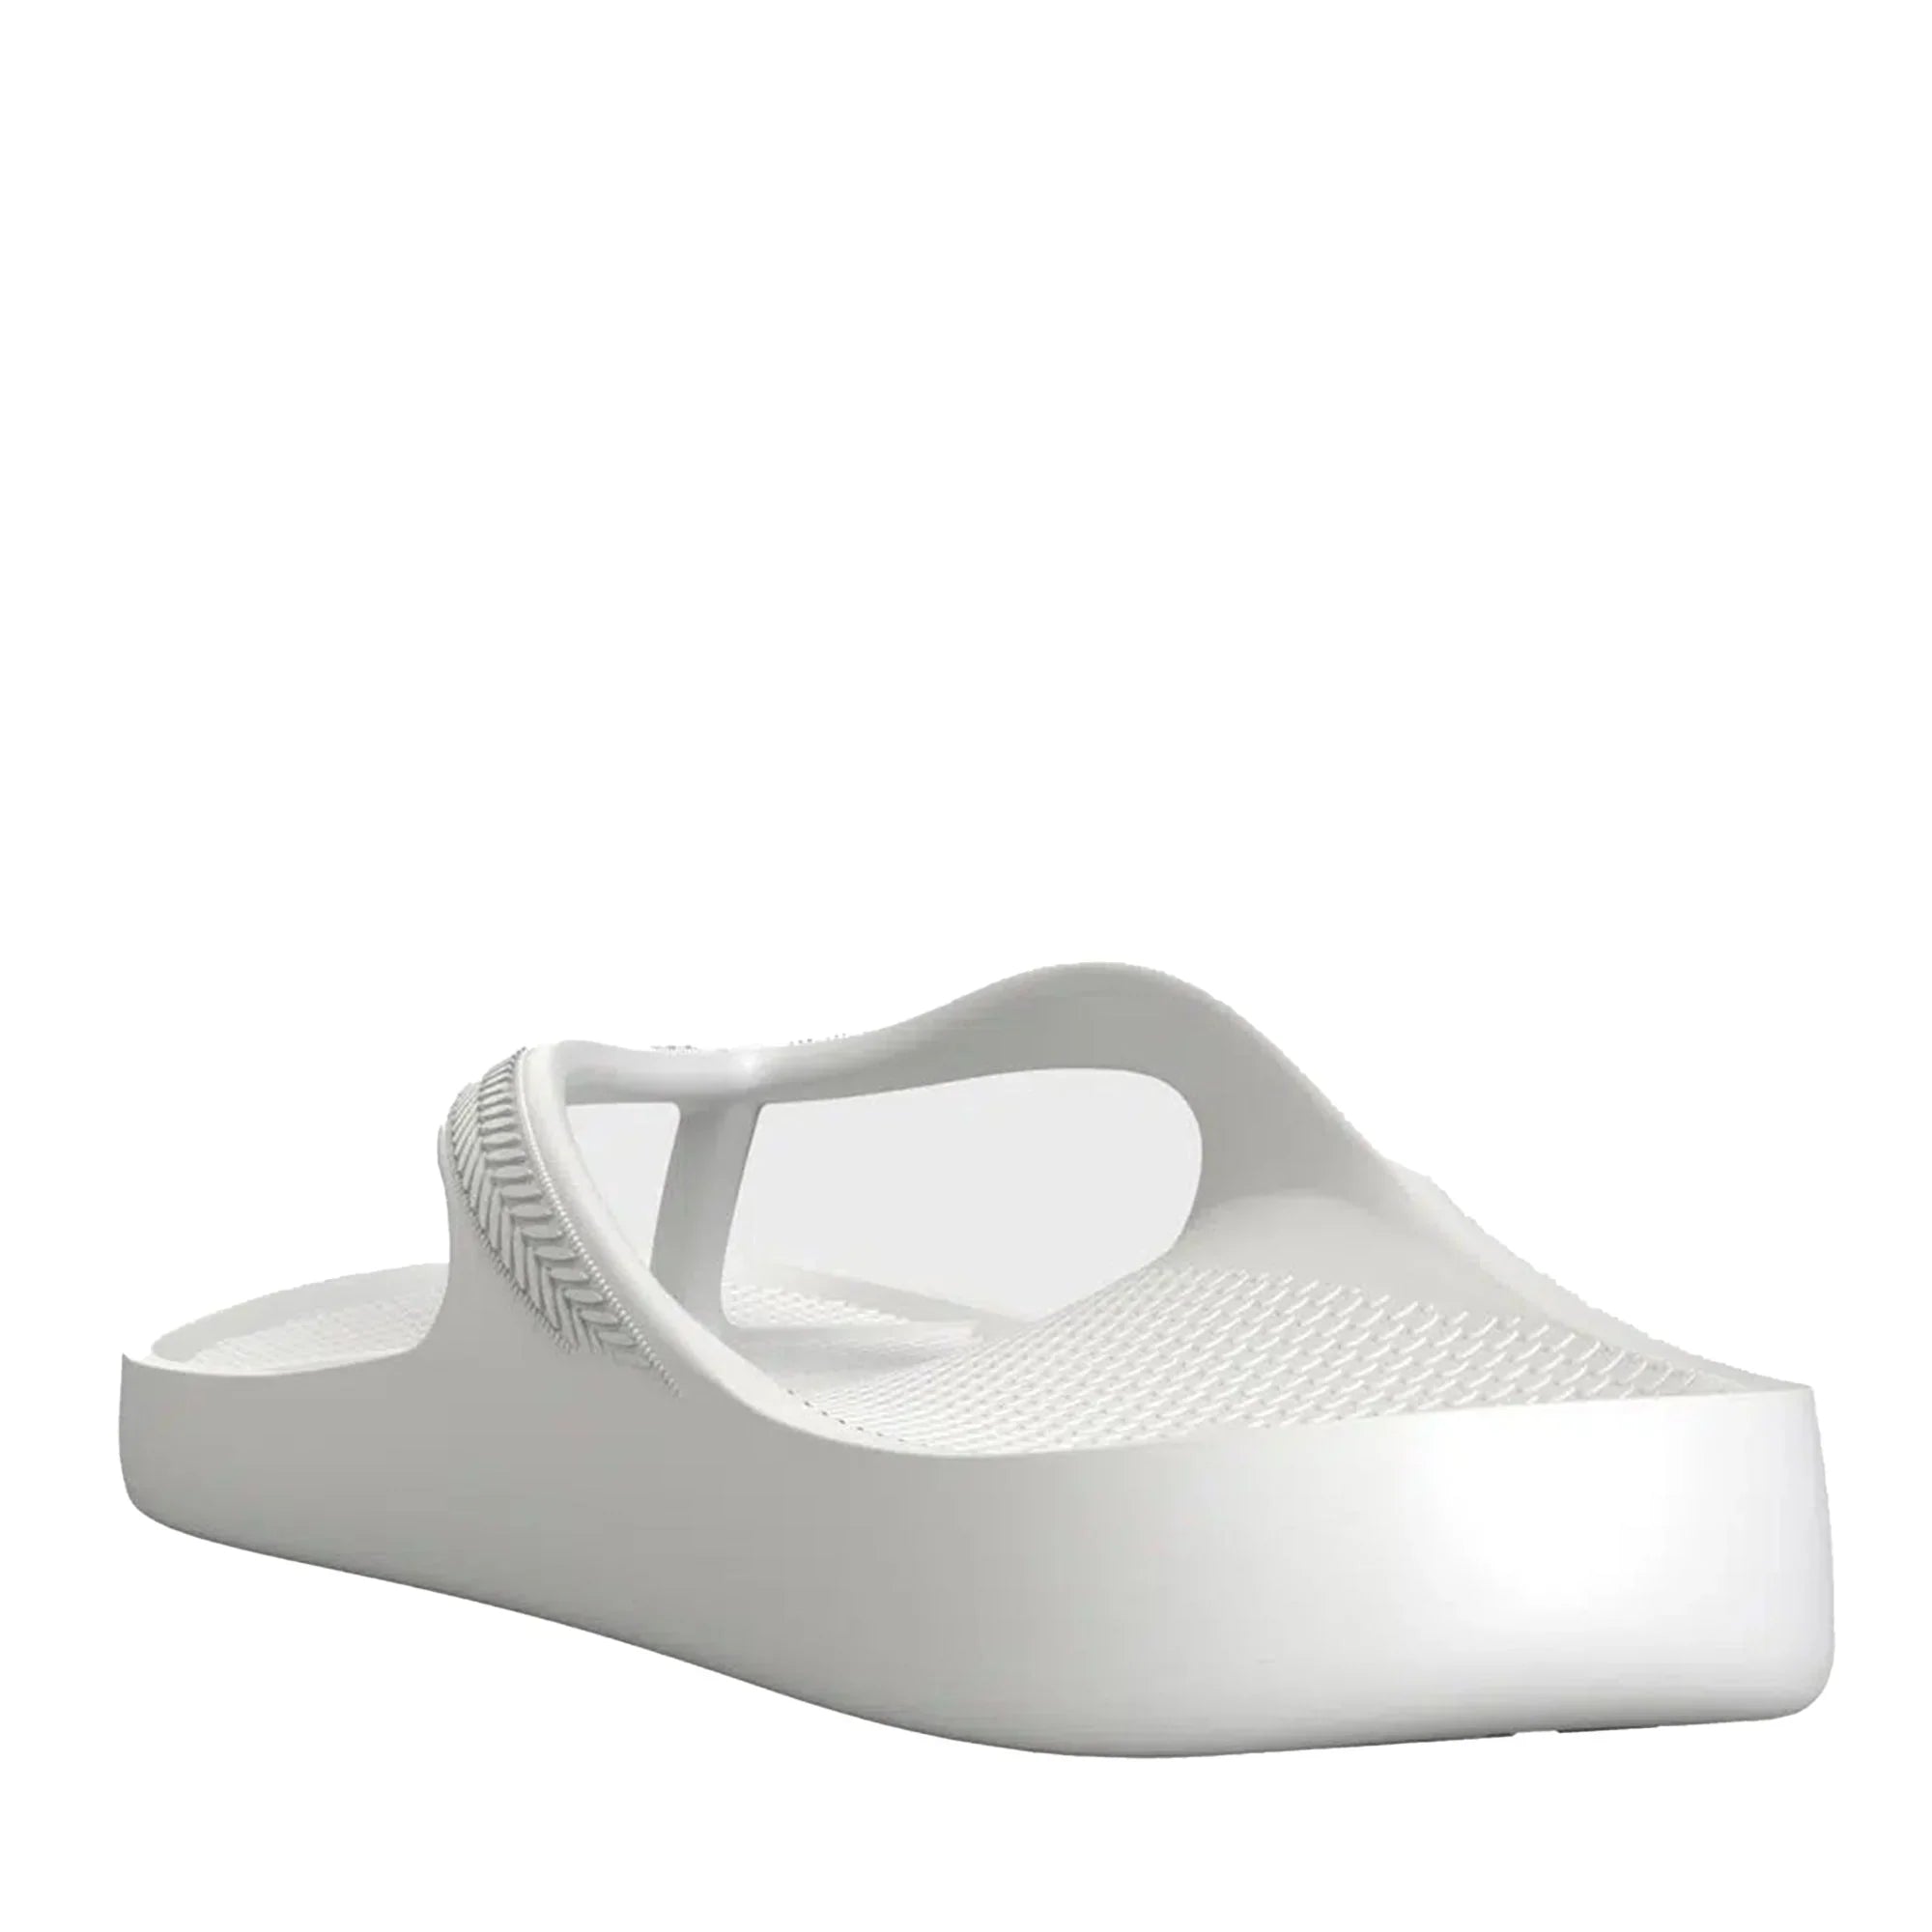 White Arch Support Orthotic Unisex Thongs